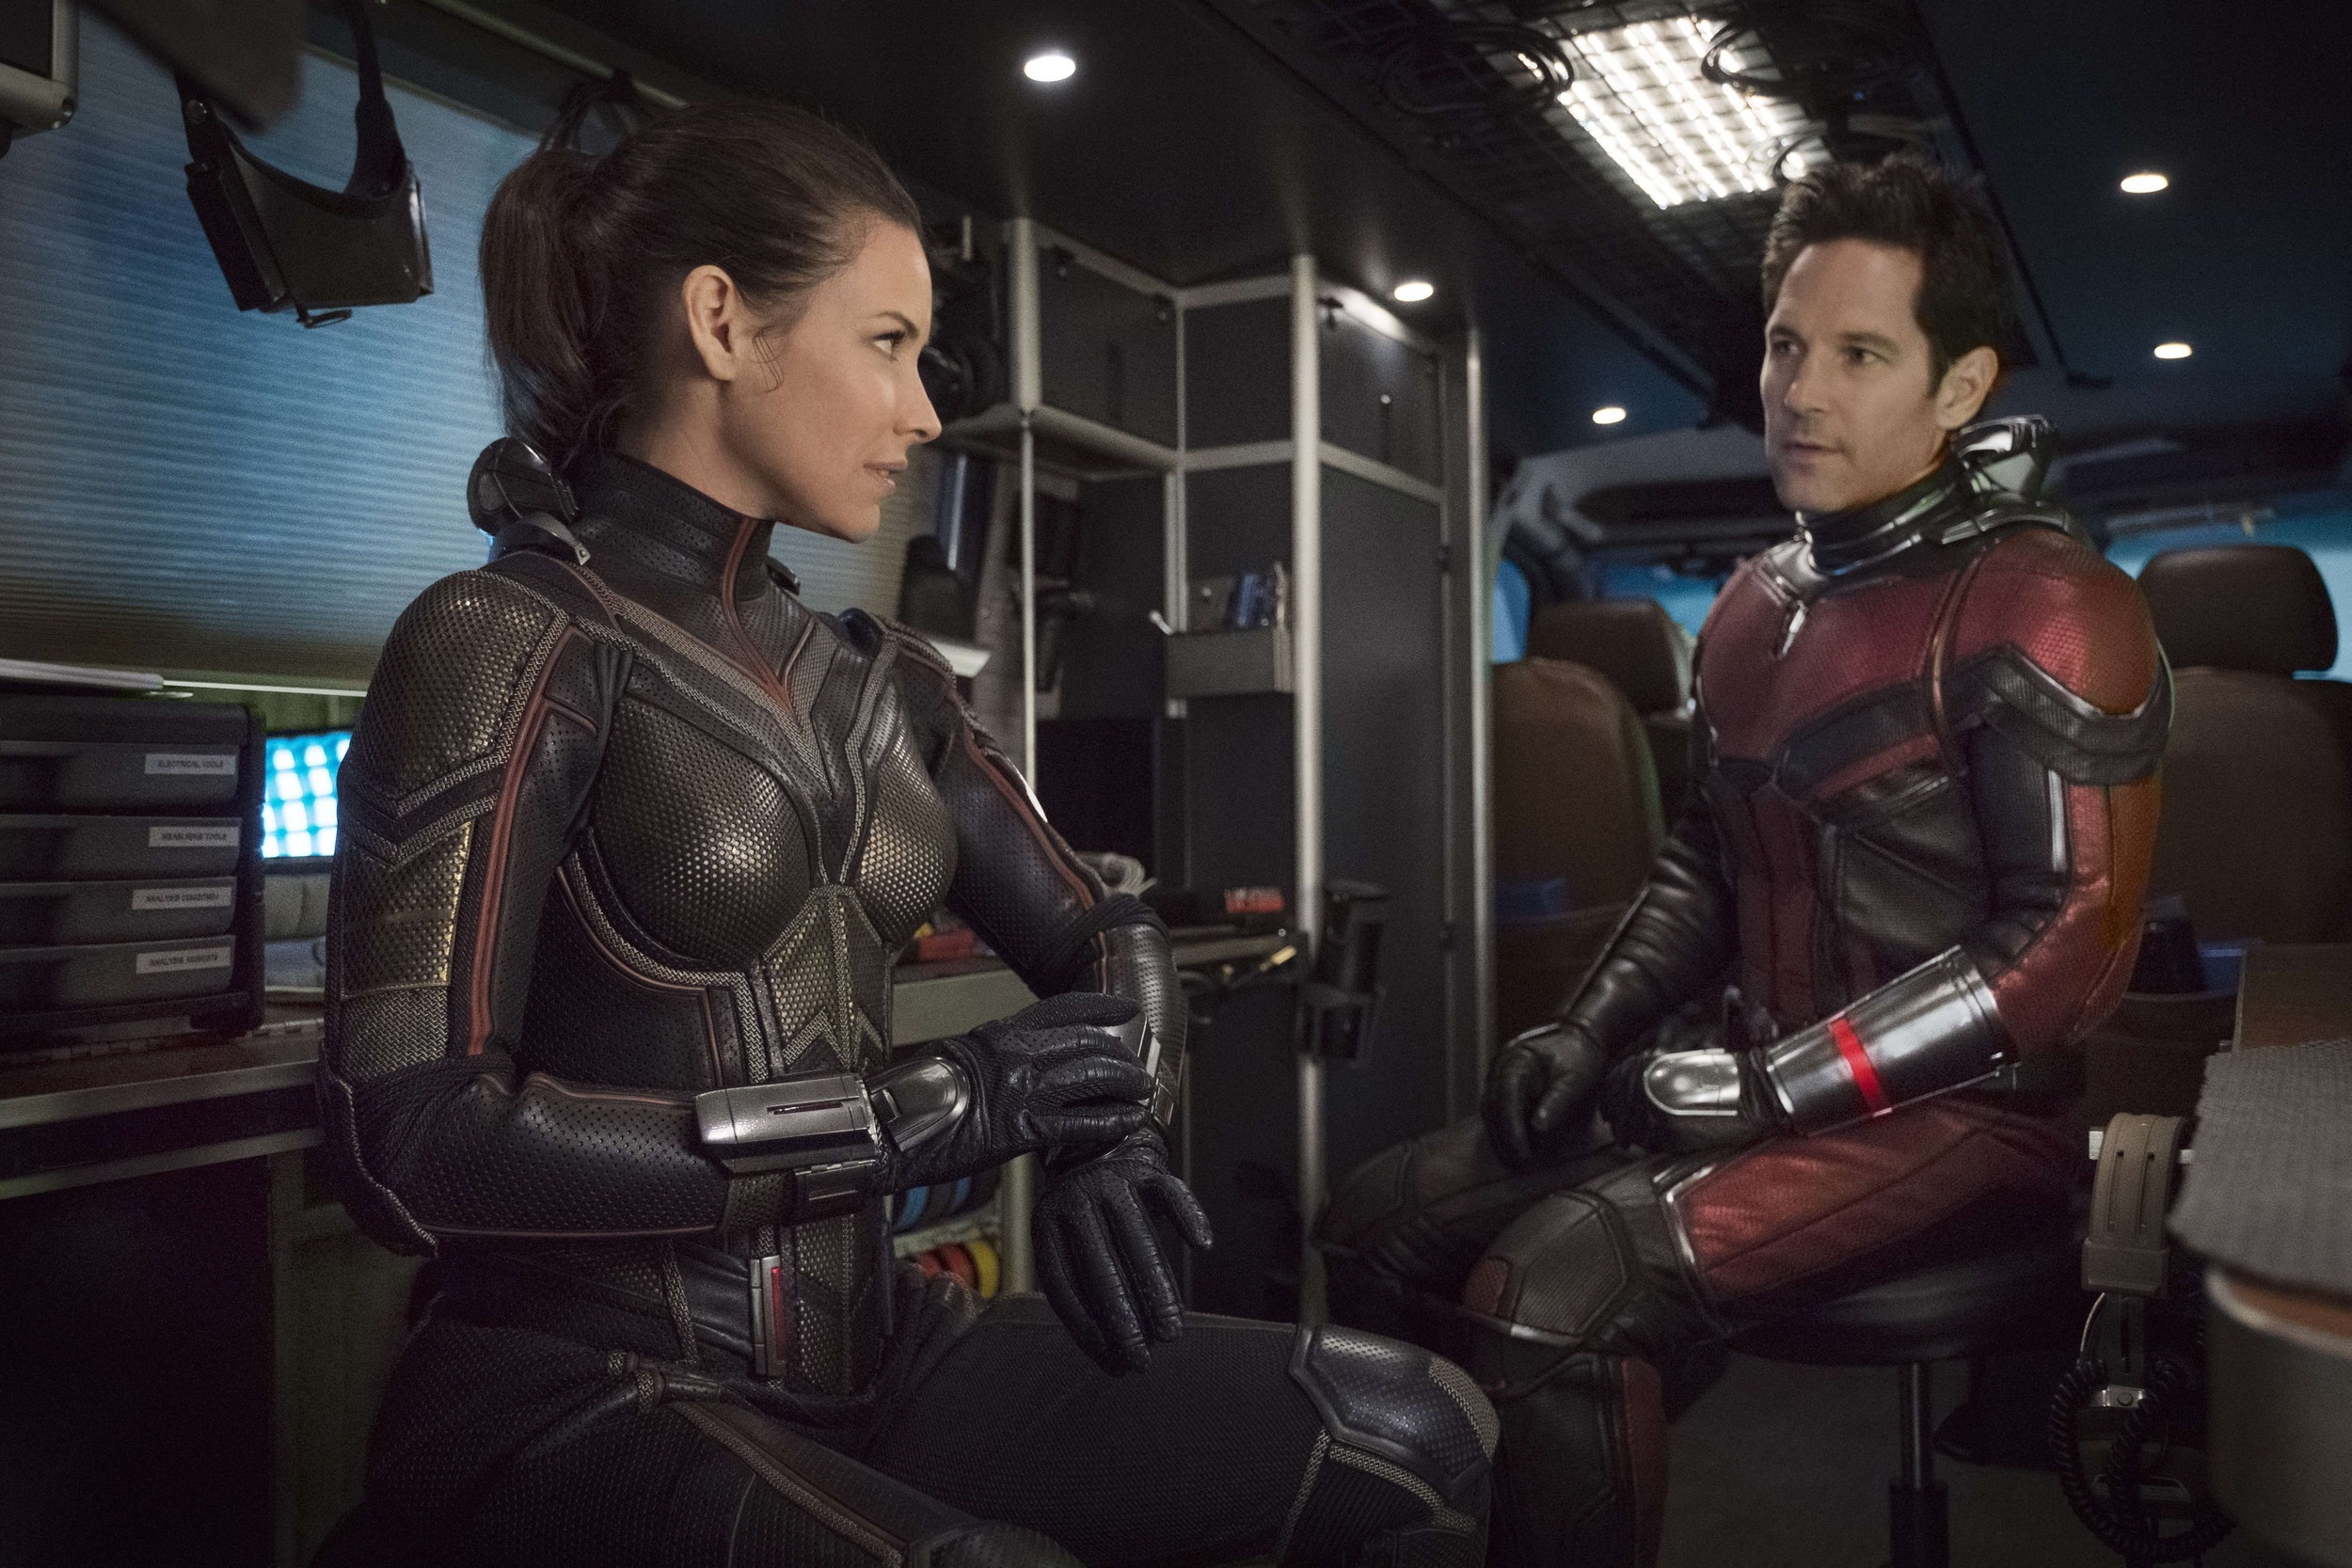 <p>While the MCU might be most famous for its fight scenes and sprawling narrative arcs, every so often, one of its films manages to do something a little different. <span><em>Ant-Man and the Wasp</em>, </span>though one of the studio’s more underrated gems, went so far as to<a href="https://www.nytimes.com/2018/07/06/movies/antman-and-the-wasp-science.html"><span> hire scientists to help get the science behind quantum physics right</span></a>, including <span>Spyridon Michalakis of the Institute for Quantum Information and Matter at Caltech. The way that the Quantum Realm is depicted draws extensively from what scientists have hypothesized, proving once again that there are many times when real science is just as fascinating as fiction.</span></p><p><a href='https://www.msn.com/en-us/community/channel/vid-cj9pqbr0vn9in2b6ddcd8sfgpfq6x6utp44fssrv6mc2gtybw0us'>Follow us on MSN to see more of our exclusive entertainment content.</a></p>